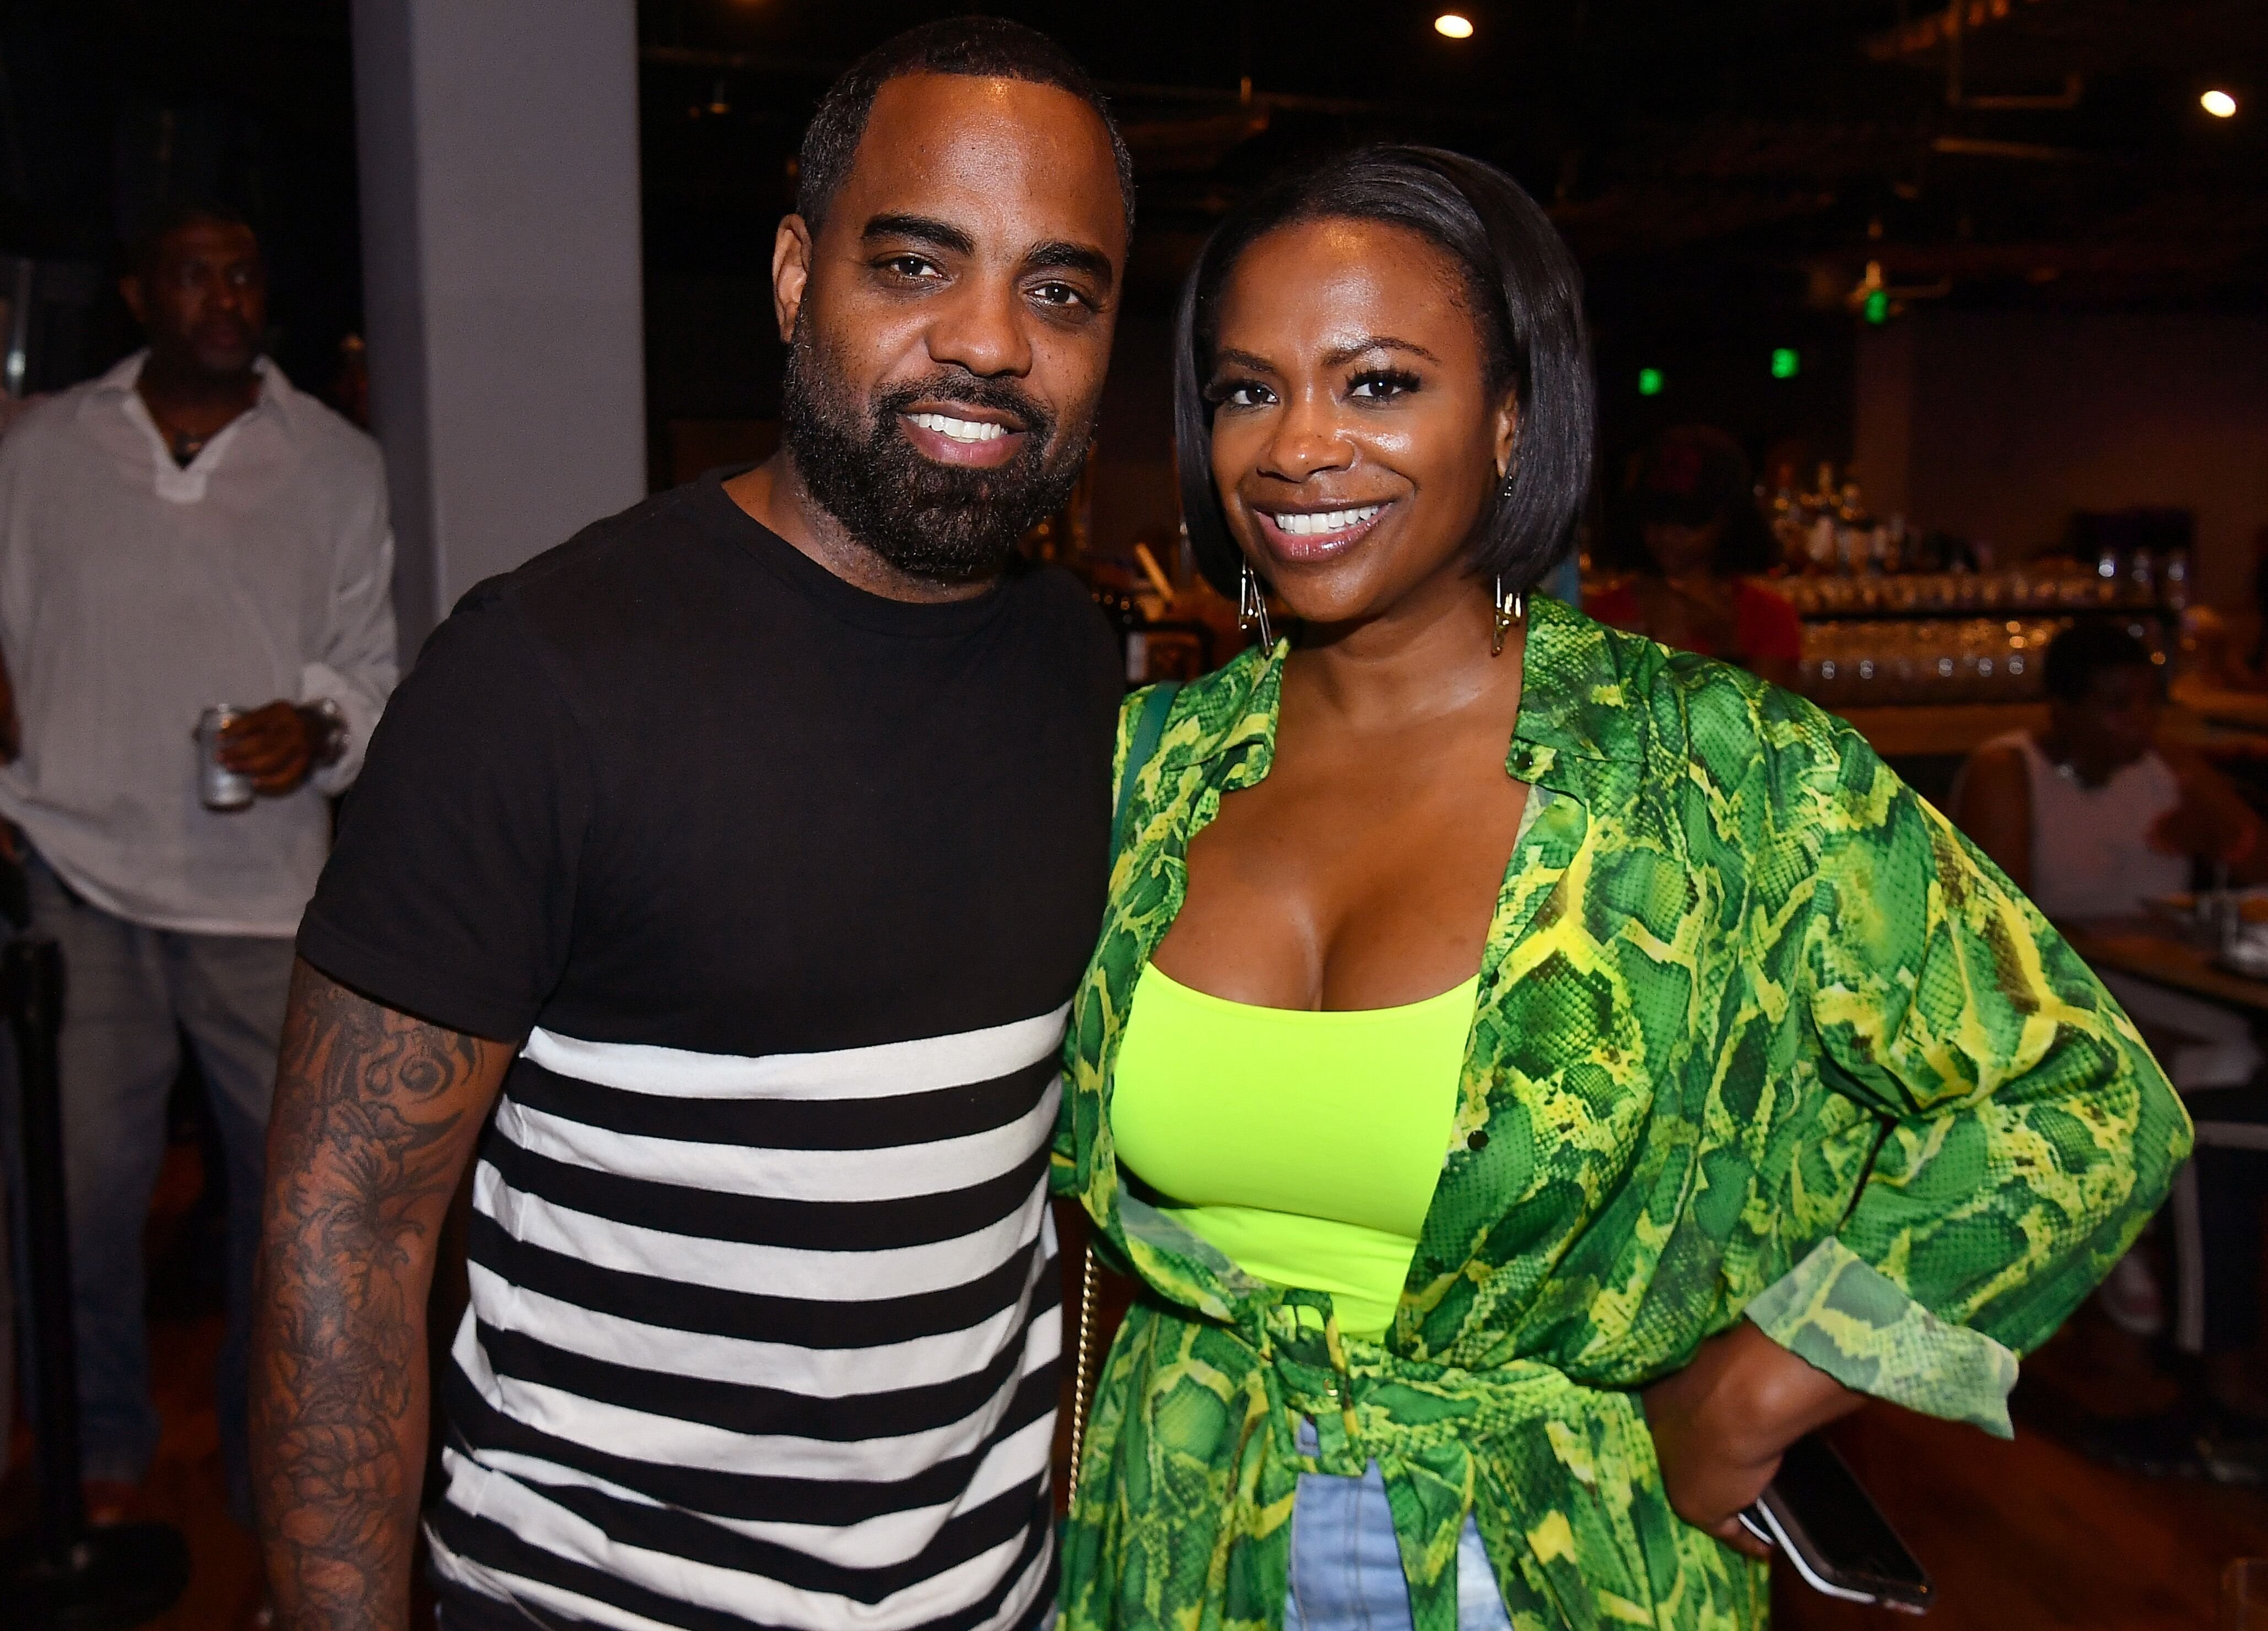 "Real Housewives of Atlanta" star Kandi Burruss and husband Todd Tucker/ Source: Getty Images